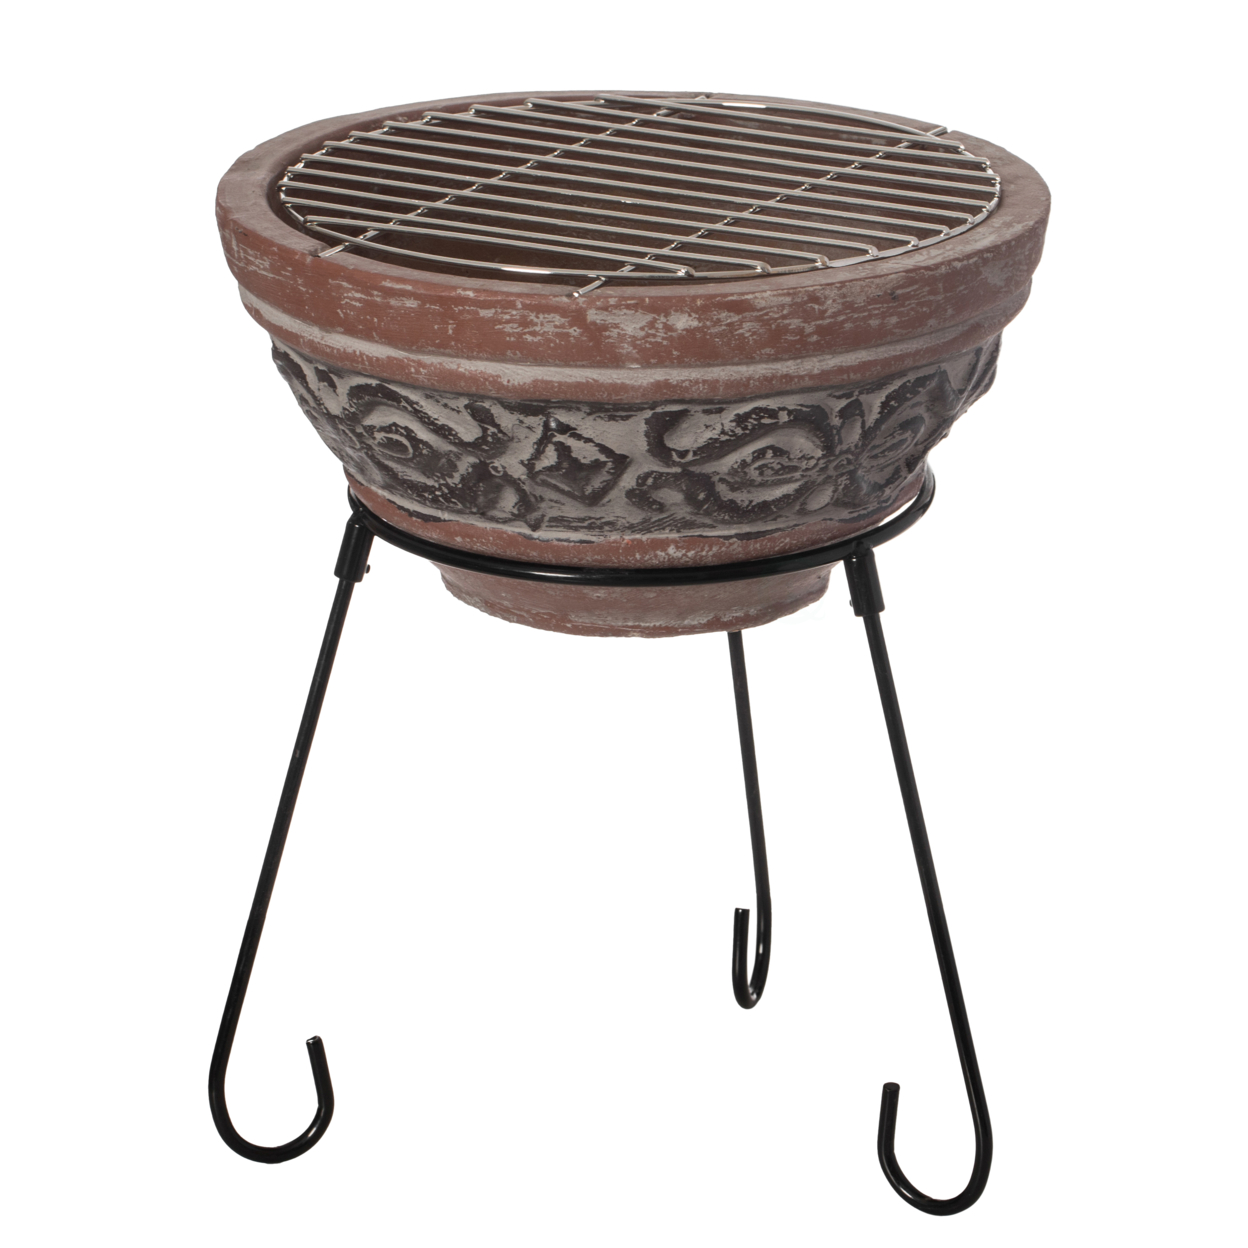 Outdoor Small Red And Gray Clay Grill Accent Design Charcoal Burning Fire Pit With Sturdy Metal Stand, Barbecue, Cocktail Party